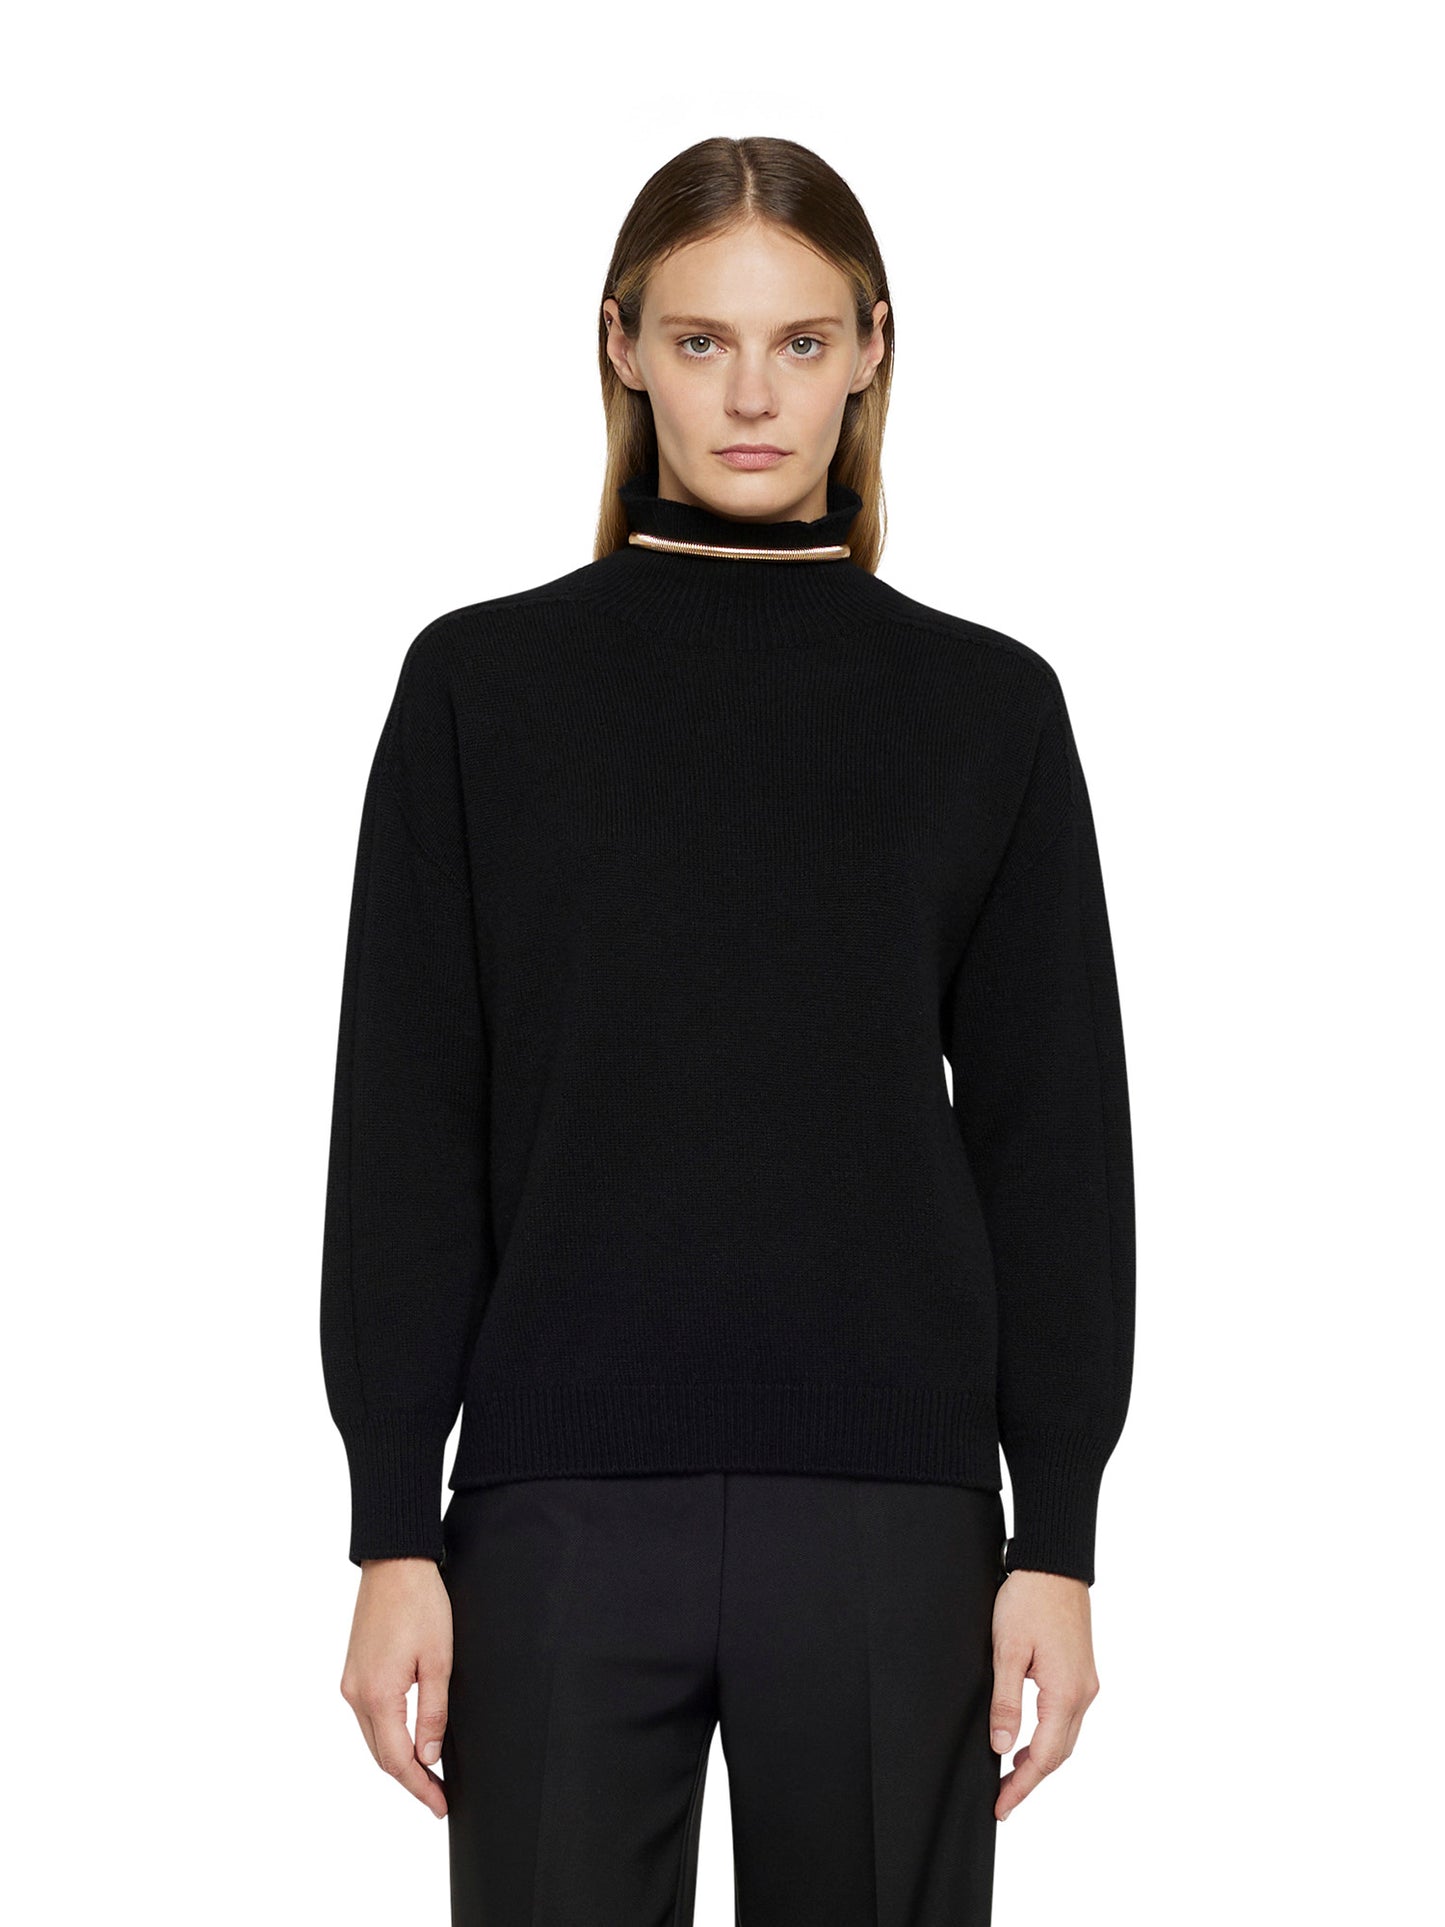 Cashmere wool turtleneck sweater with snake accessory in the collar